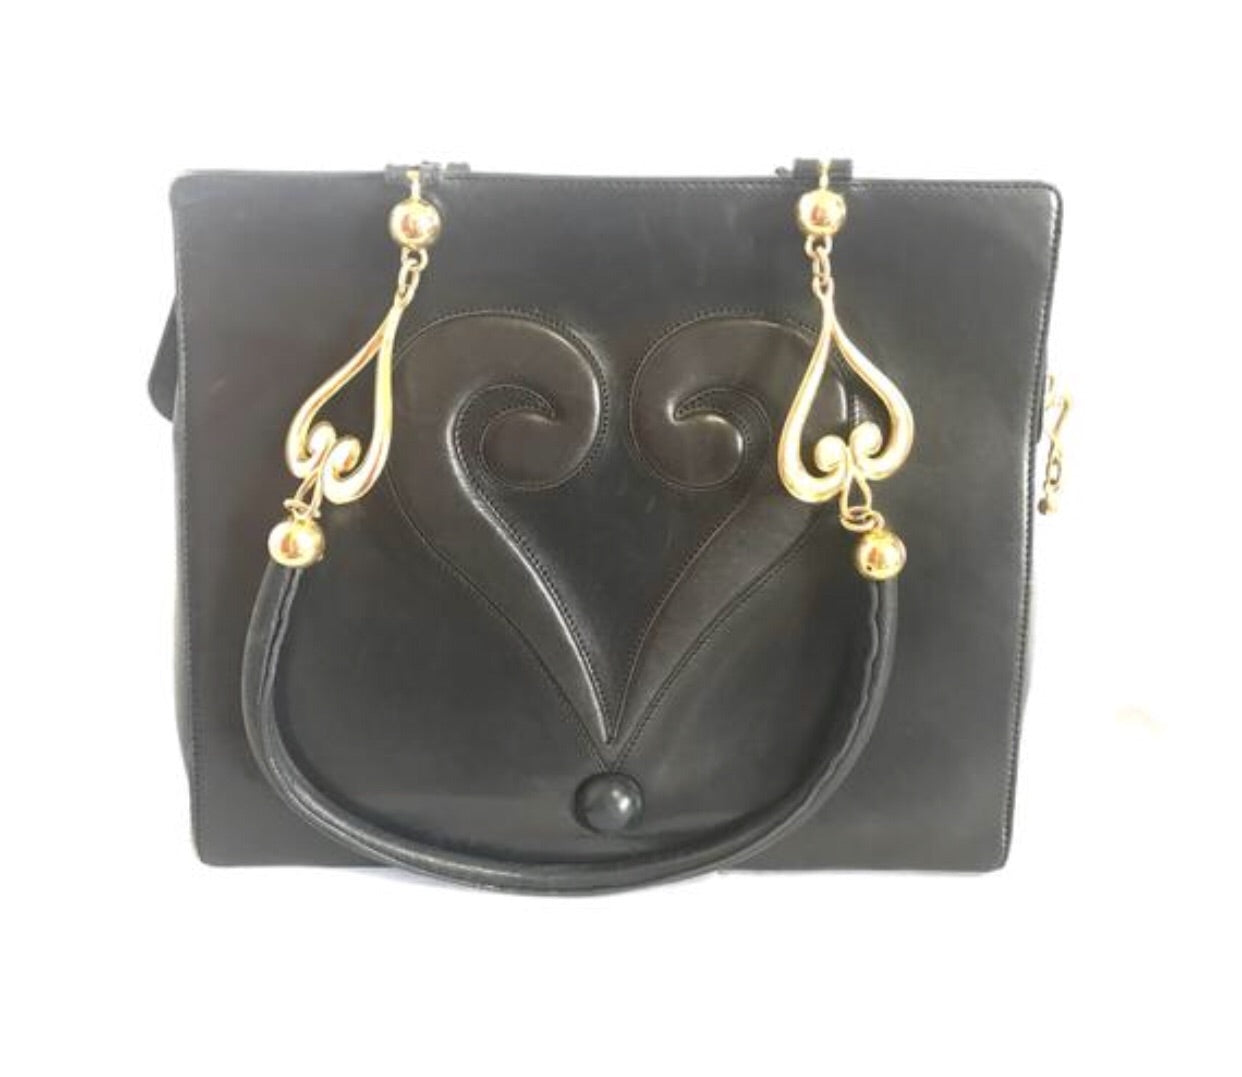 Vintage MOSCHINO black nappa leather tote shoulder bag with iconic heart question mark motifs. Must have unique purse by Redwall.